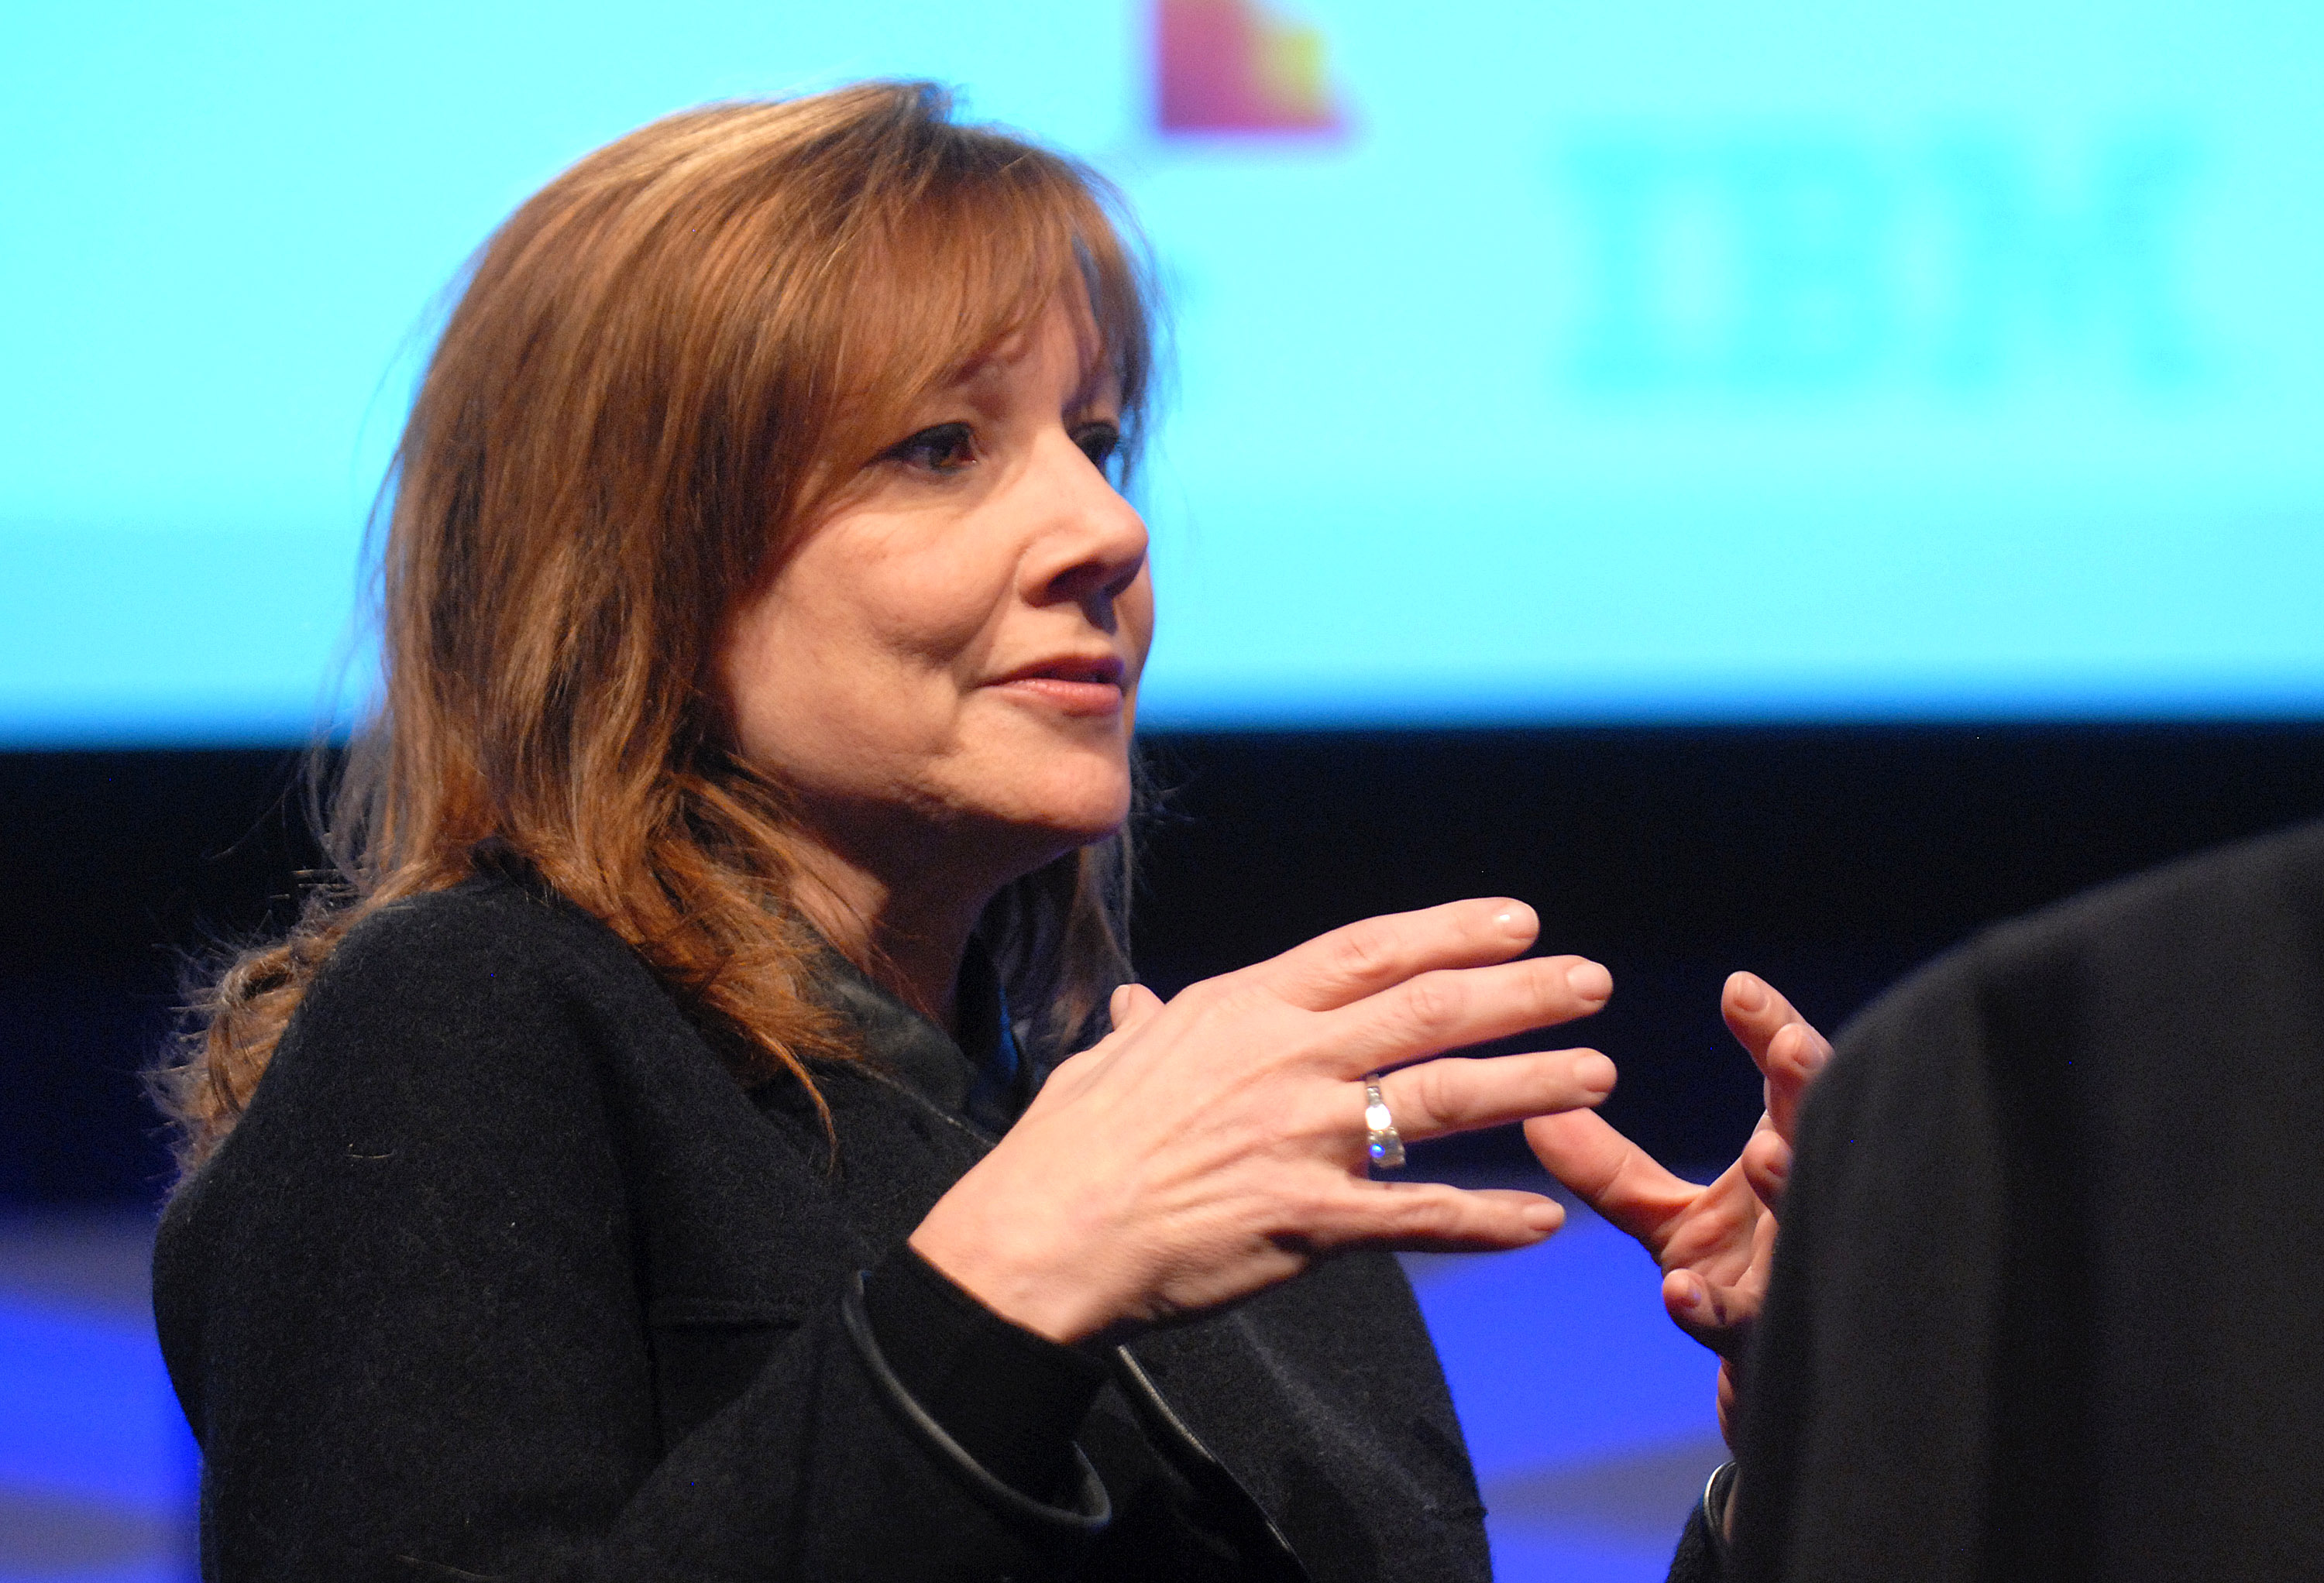 General Motors CEO Mary Barra attends the Automotive World Congress on Jan. 14, 2015 in Detroit.